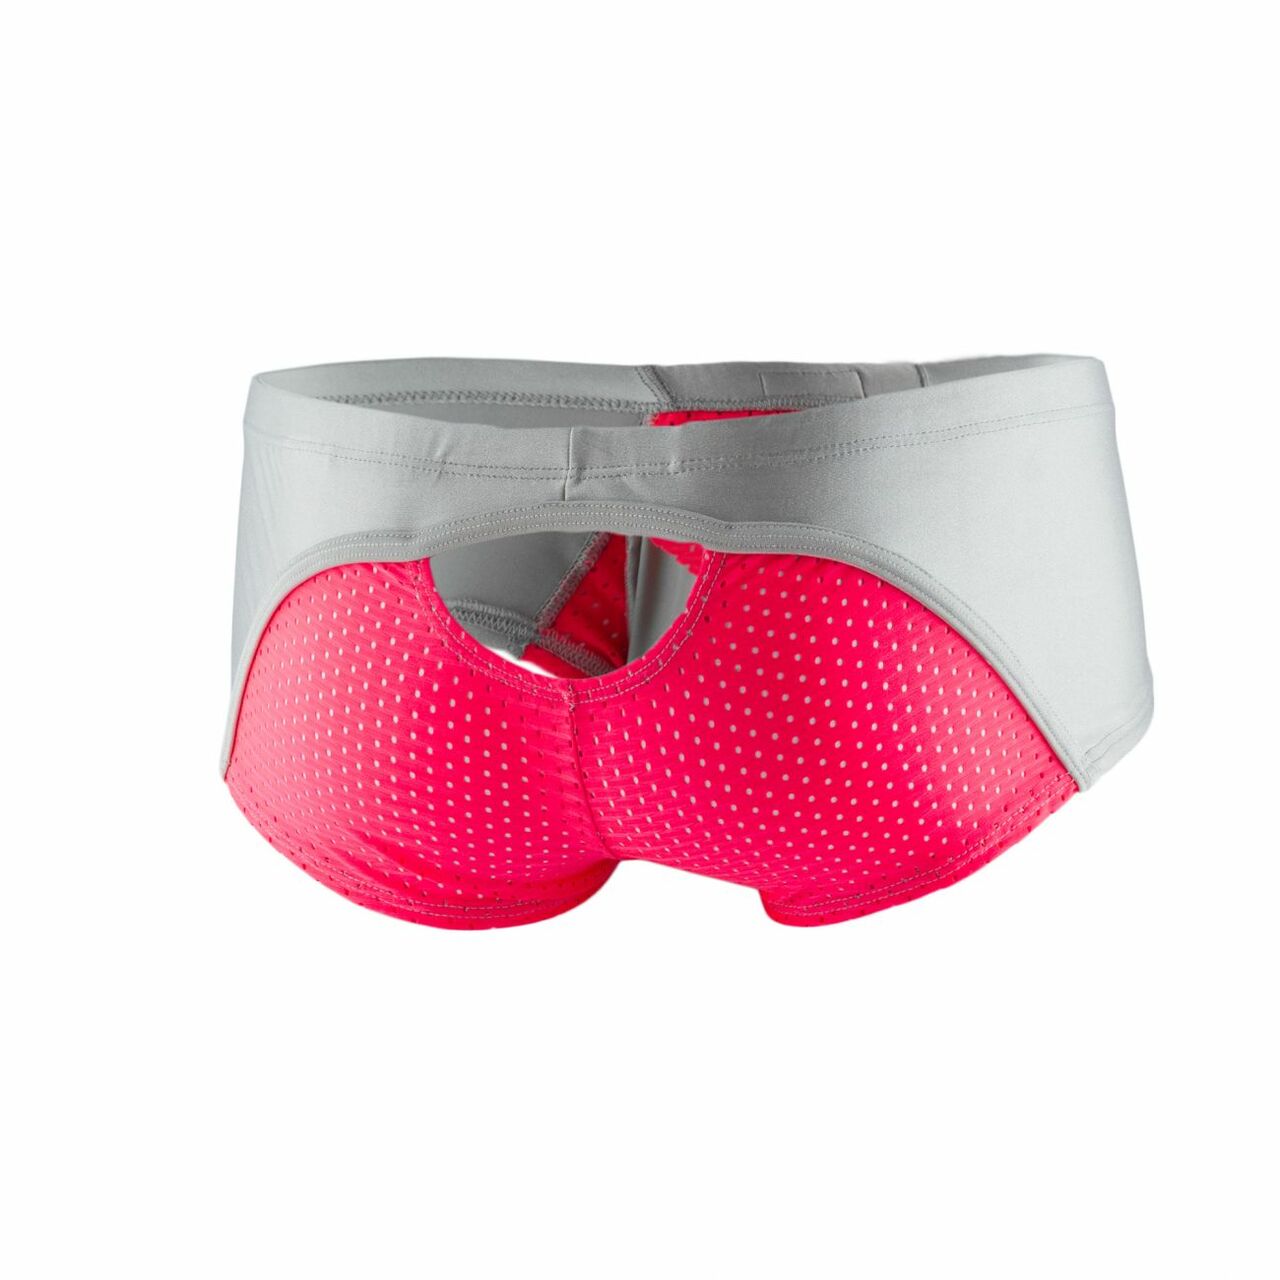 SALE - Mens Joe Snyder Sexiest Cheek Boxer Brief Coral and Gray